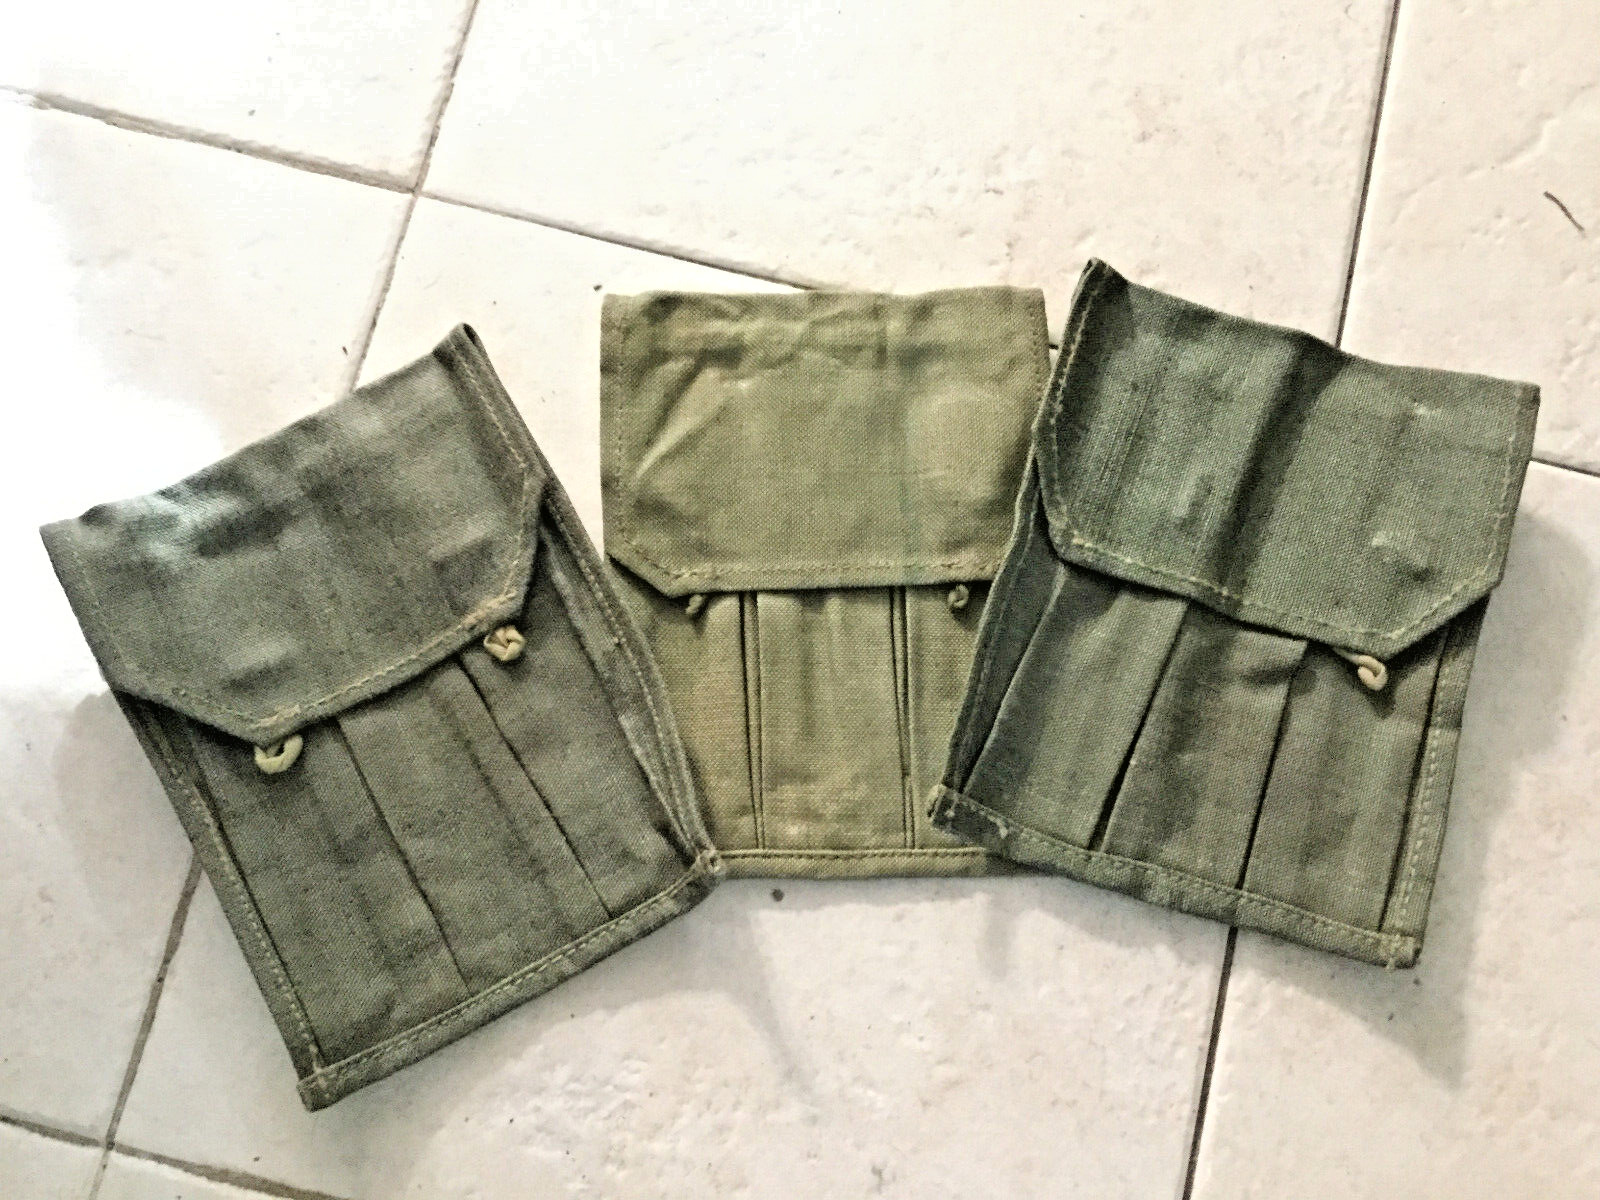 PPS43 PPSh-41 3-Cell Mag Pouch canvas belt loops Polish Poland SURPLUS